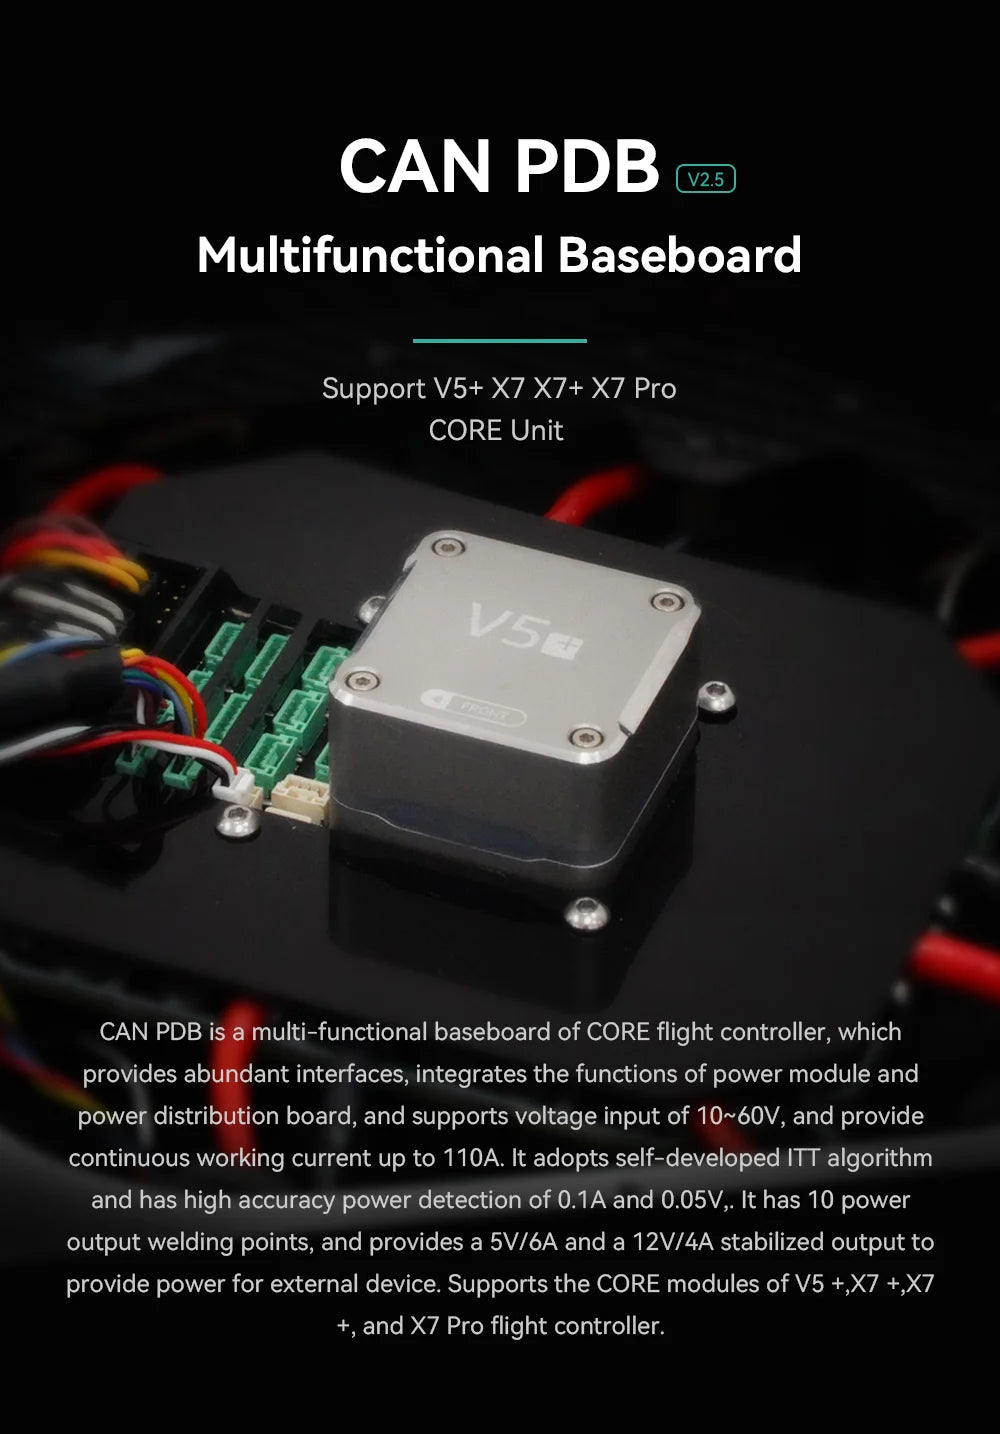 CAN PDB is a multi-functional baseboard of CORE flight controller .